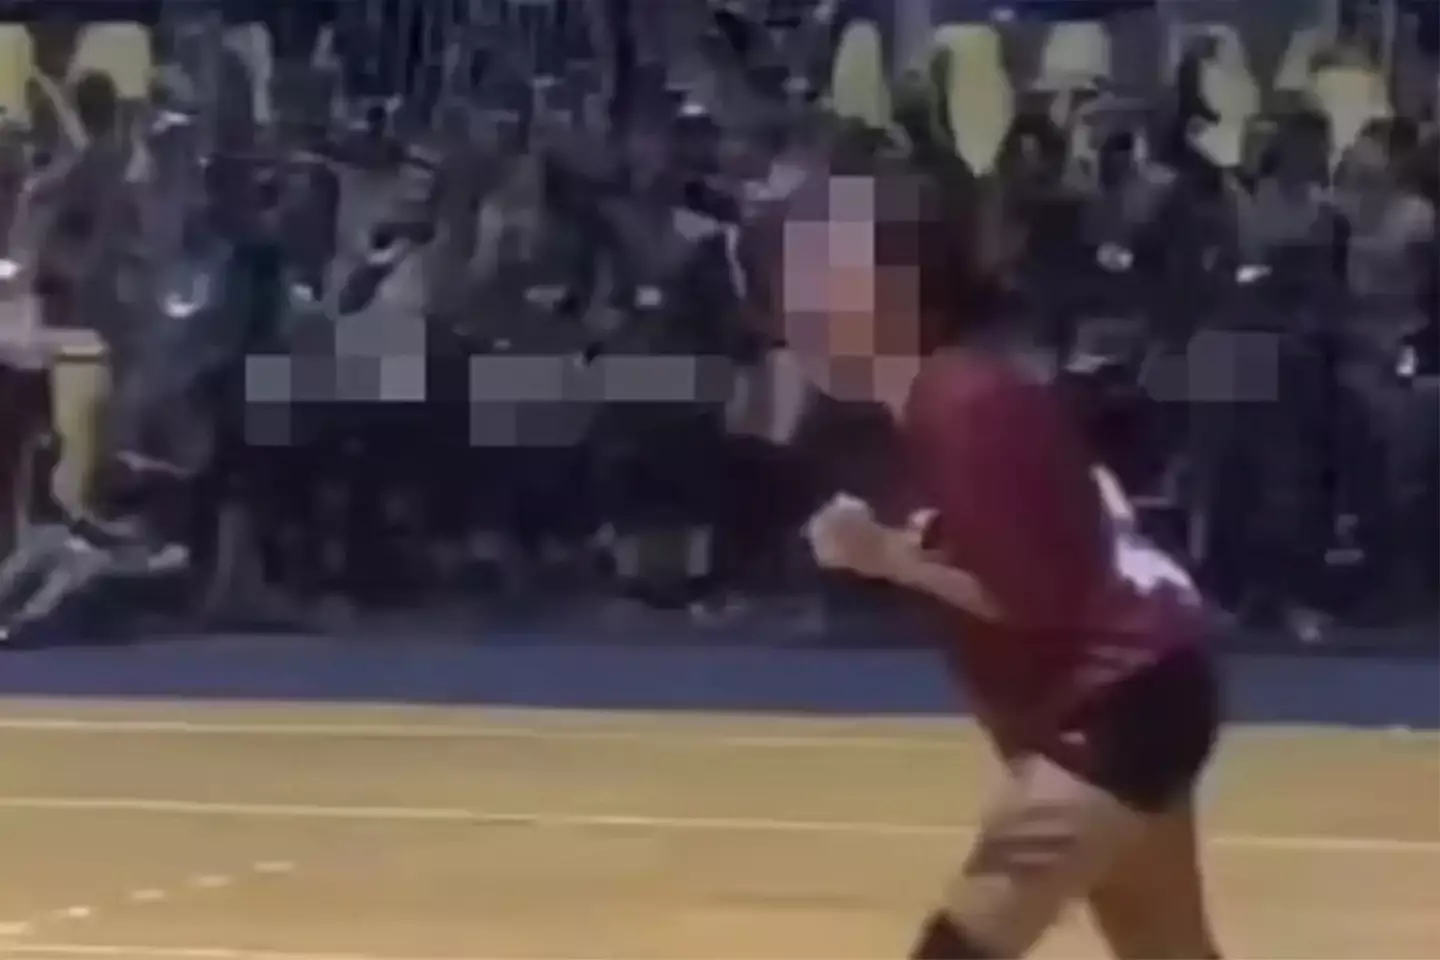 The men had sat on the sidelines of the women's volleyball game with their pants down.